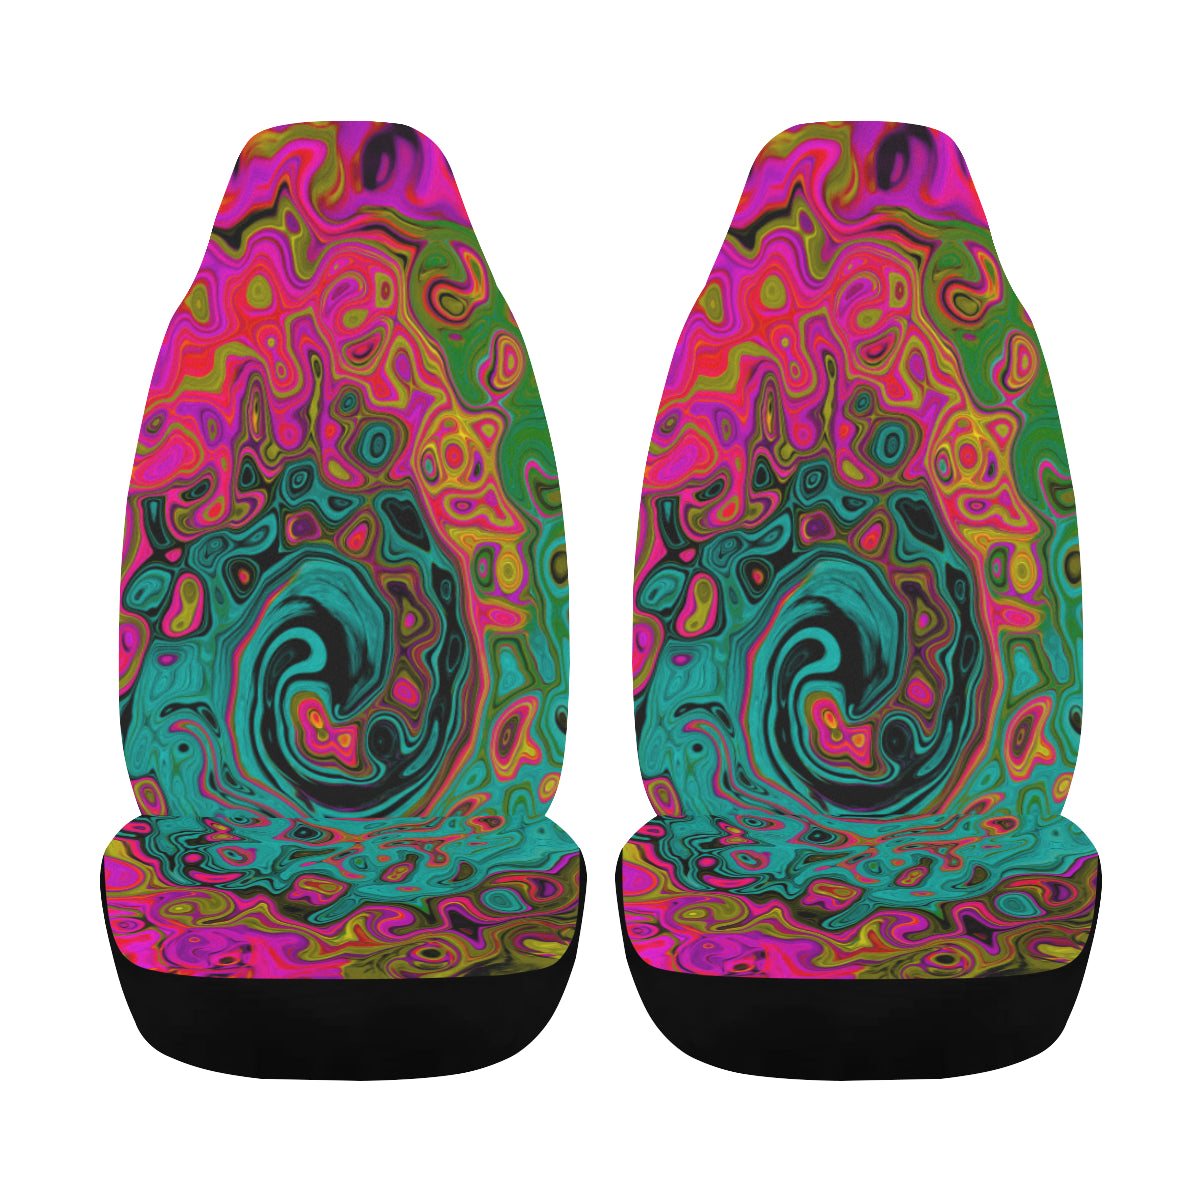 Car Seat Covers, Trippy Turquoise Abstract Retro Liquid Swirl